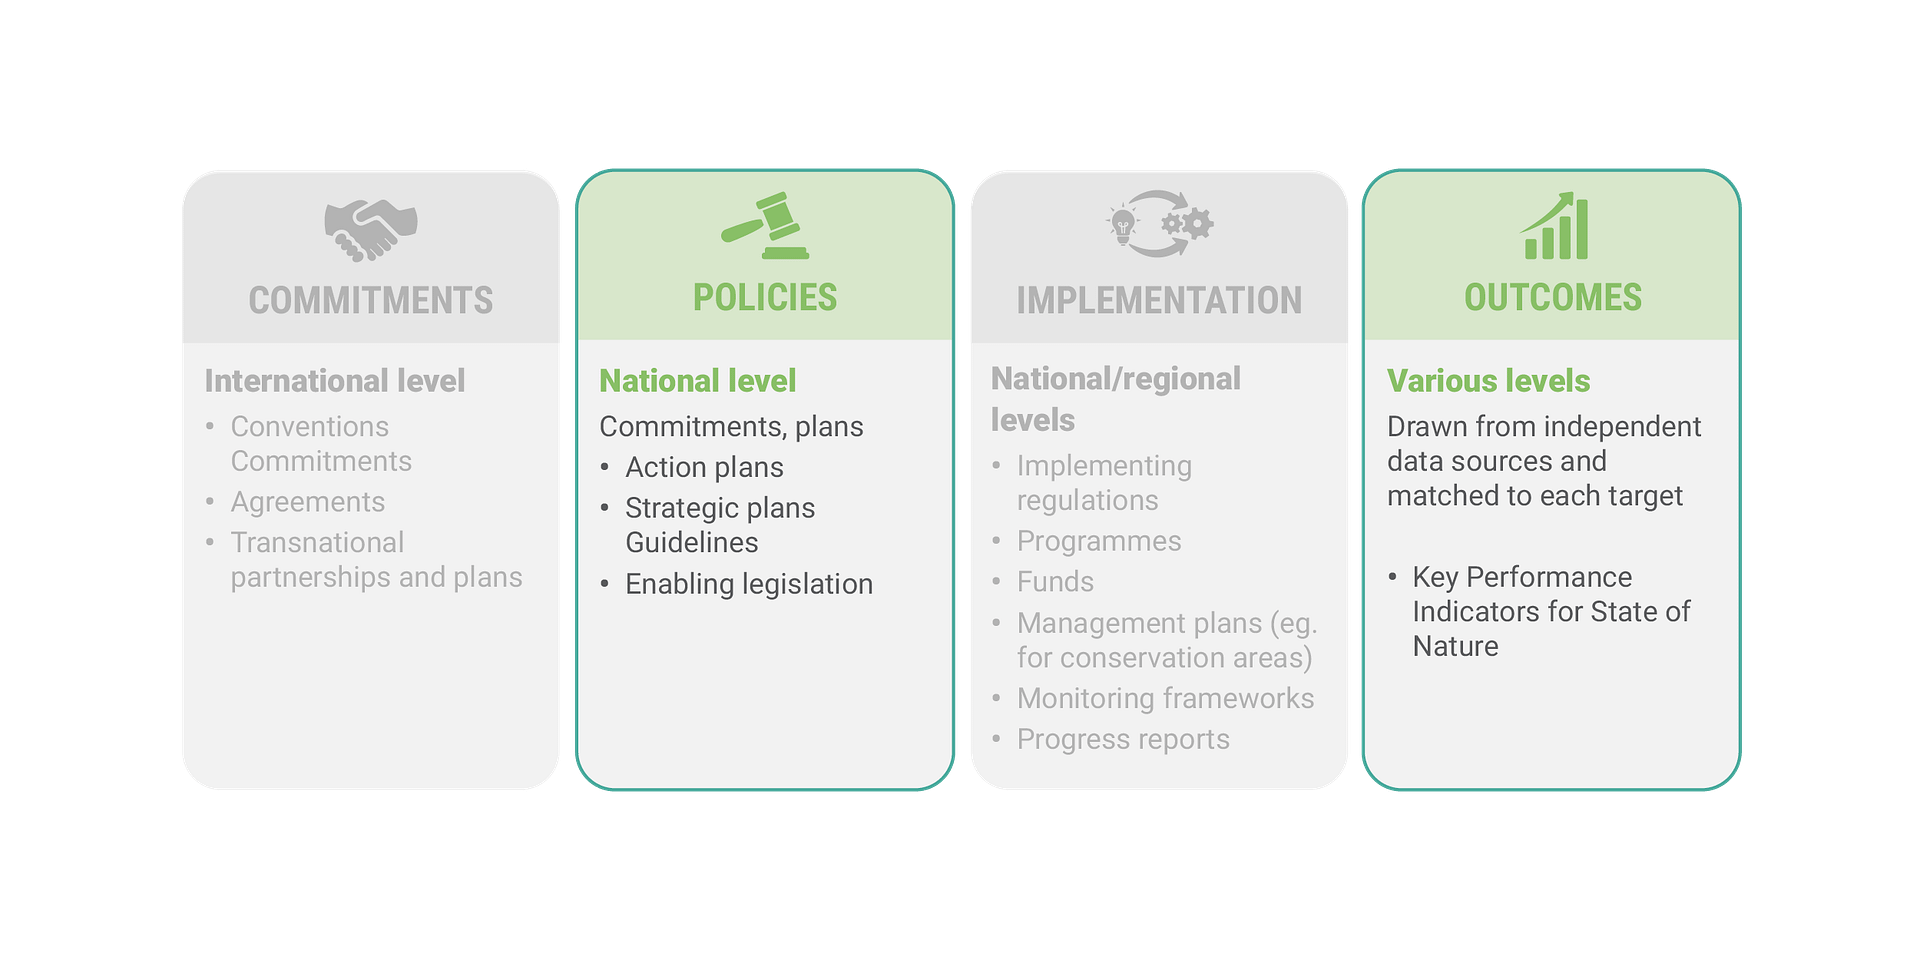 Conceptualization of the policy implementation continuum. This project focused on policies and outcomes at the national level, with some exploration of the implementation phase.  International commitments and regional implementation documents were left out of scope.